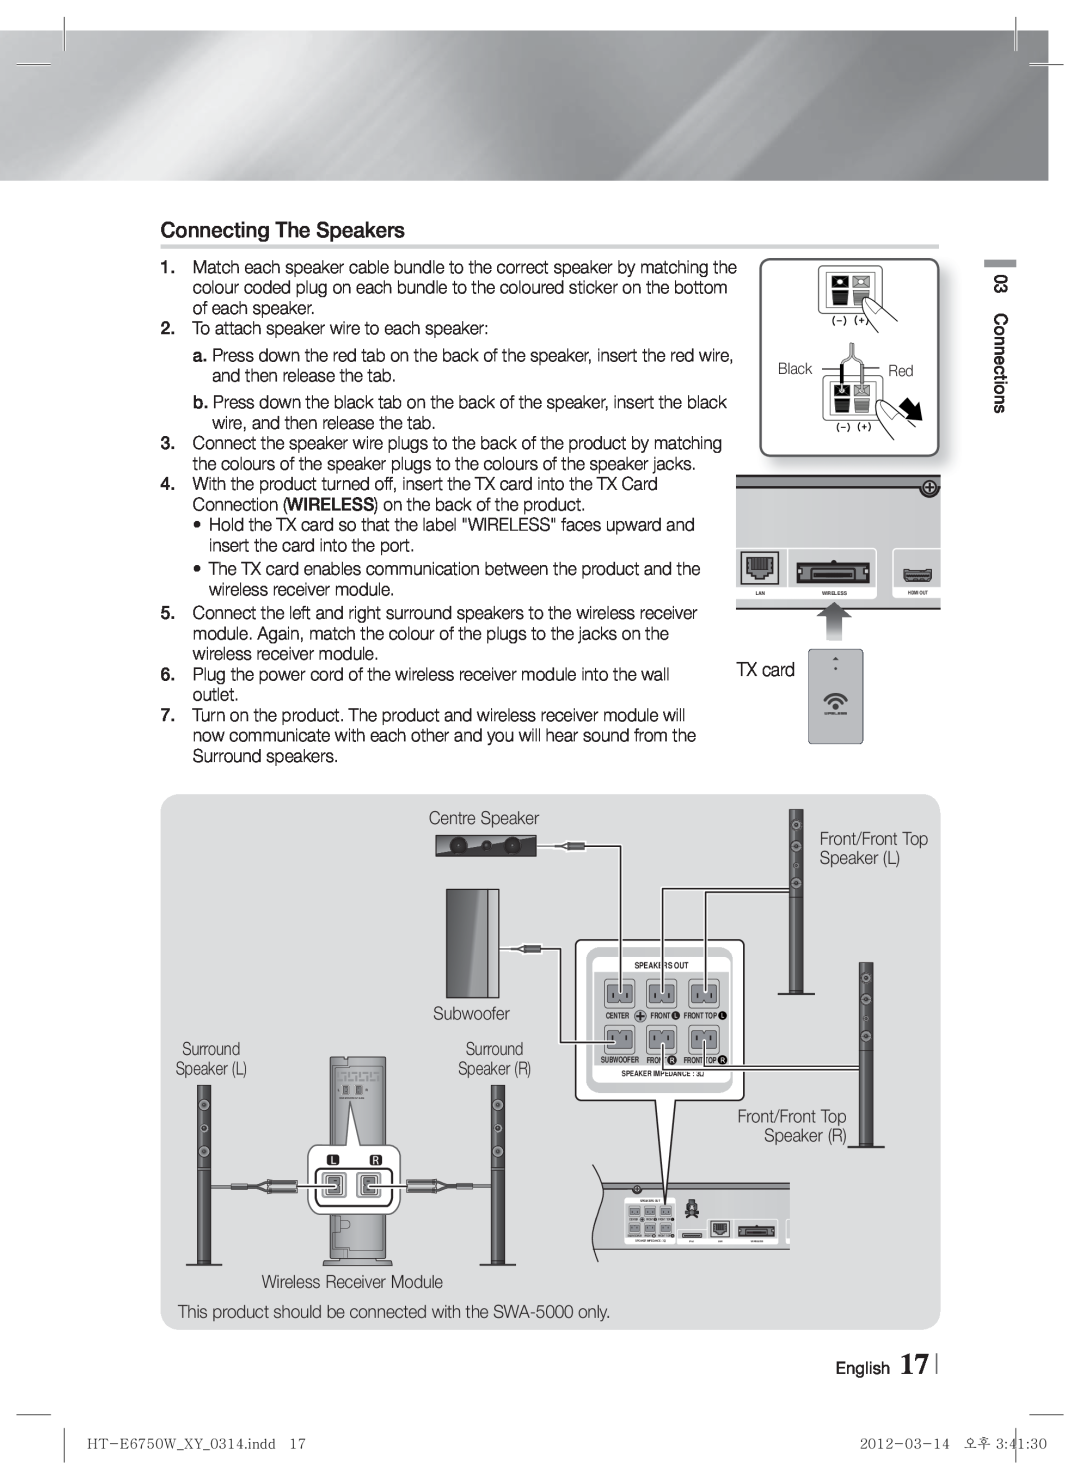 Samsung HT-E6750W user manual Connecting The Speakers, Speaker L, Front/Front Top, Speaker R 